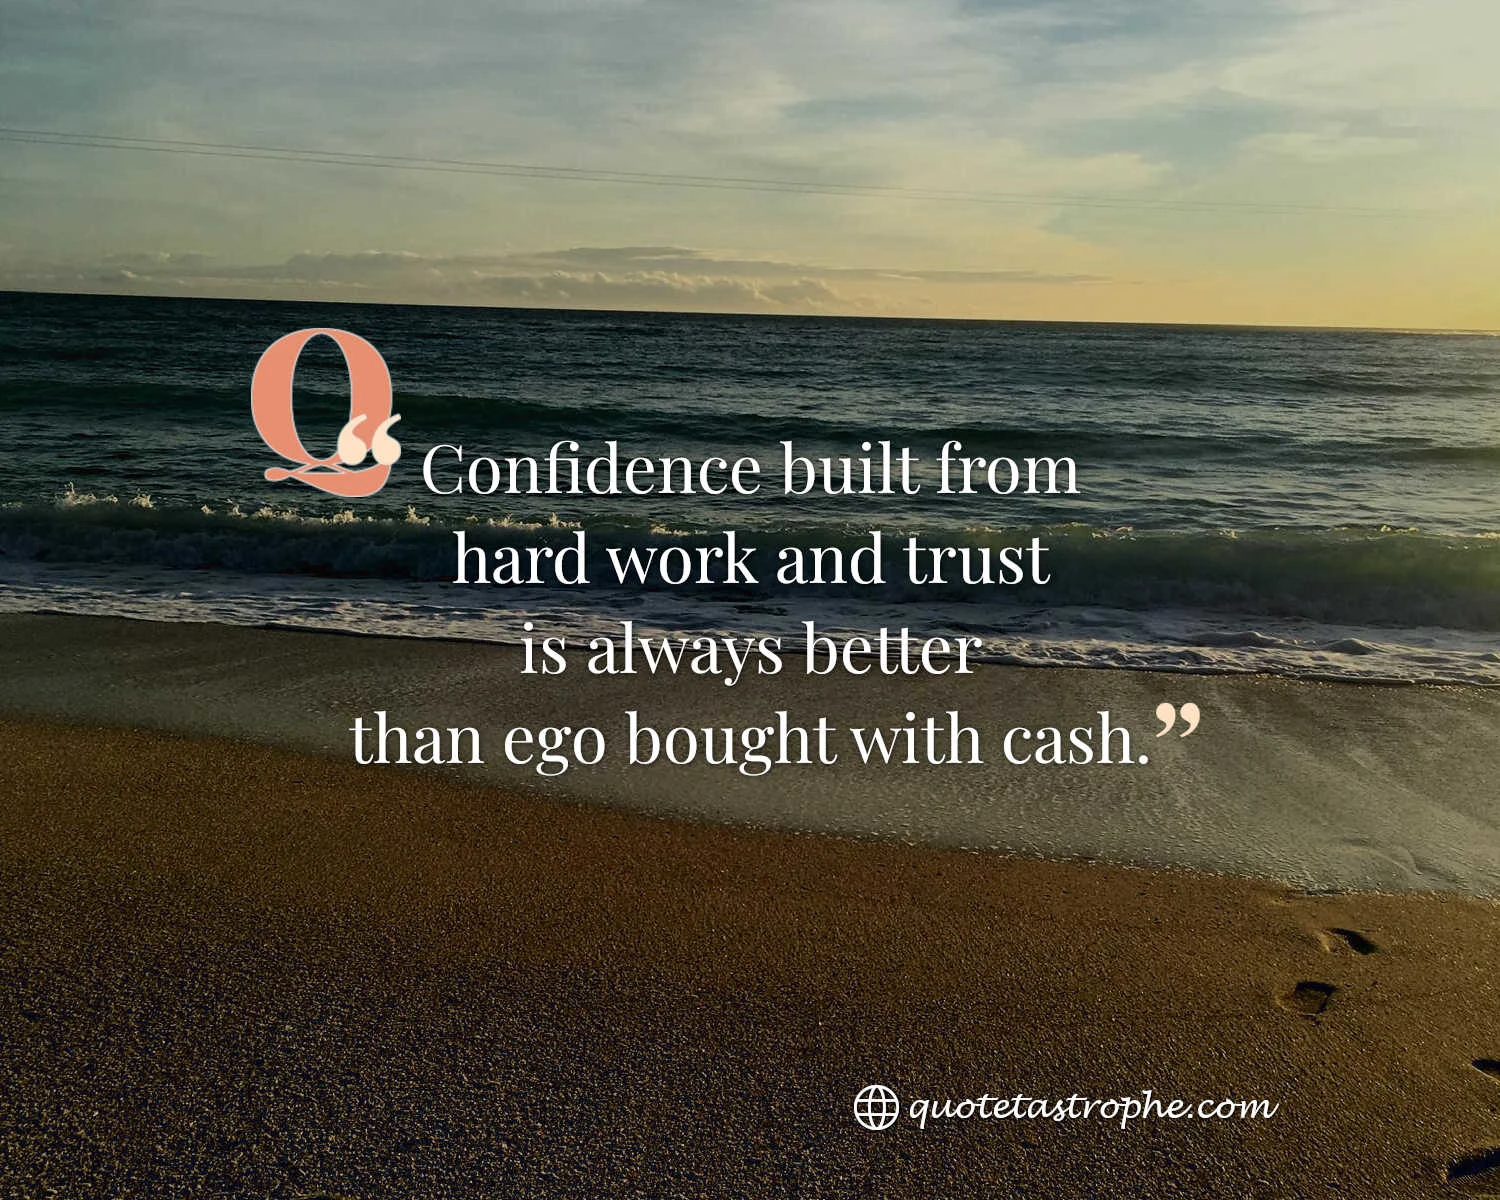 Confidence Built From Hard Work and Trust